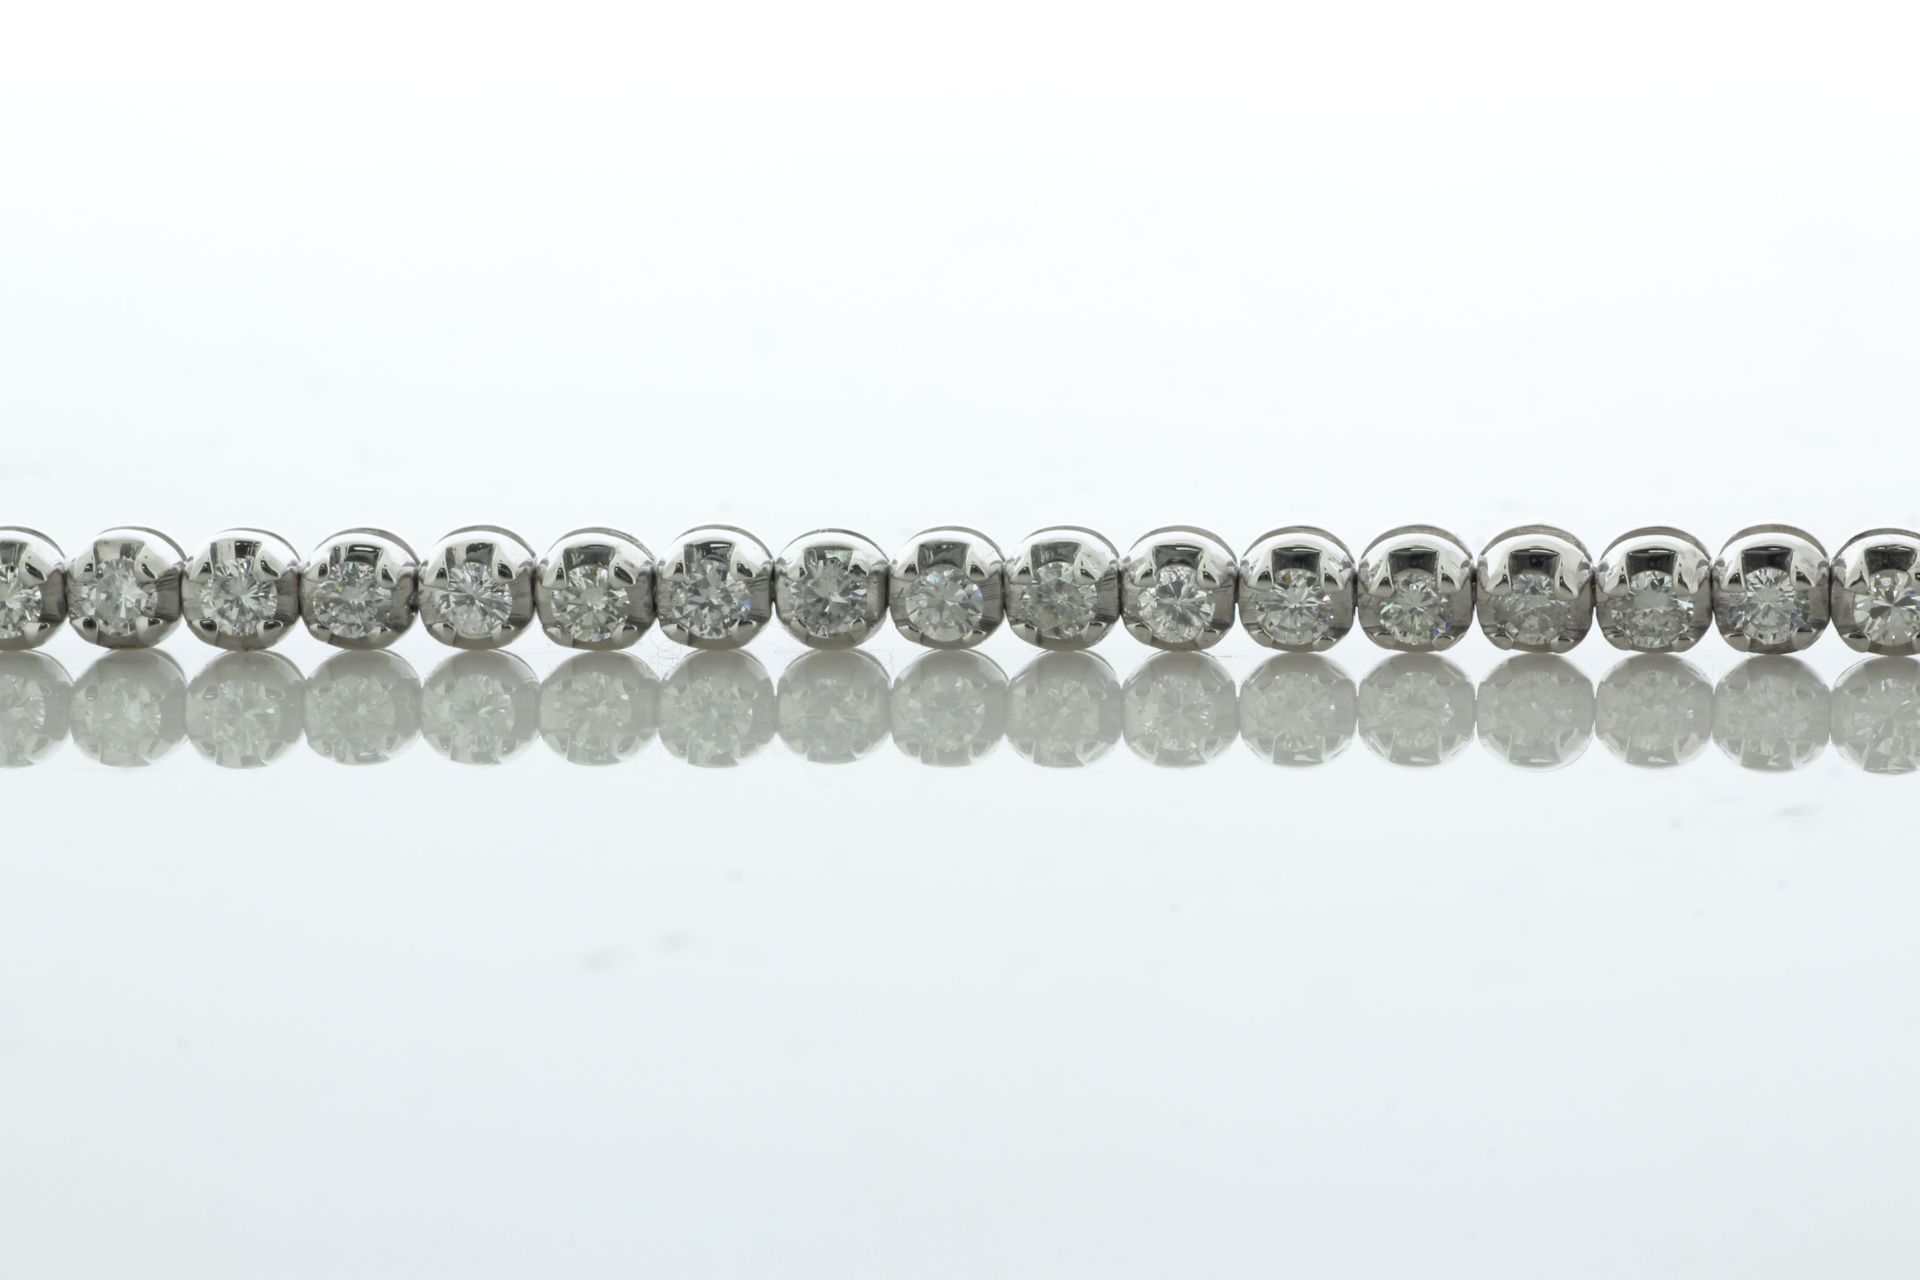 18ct White Gold Tennis Diamond Bracelet 2.39 Carats - Valued By GIE £18,465.00 - Fifty one round - Image 3 of 5